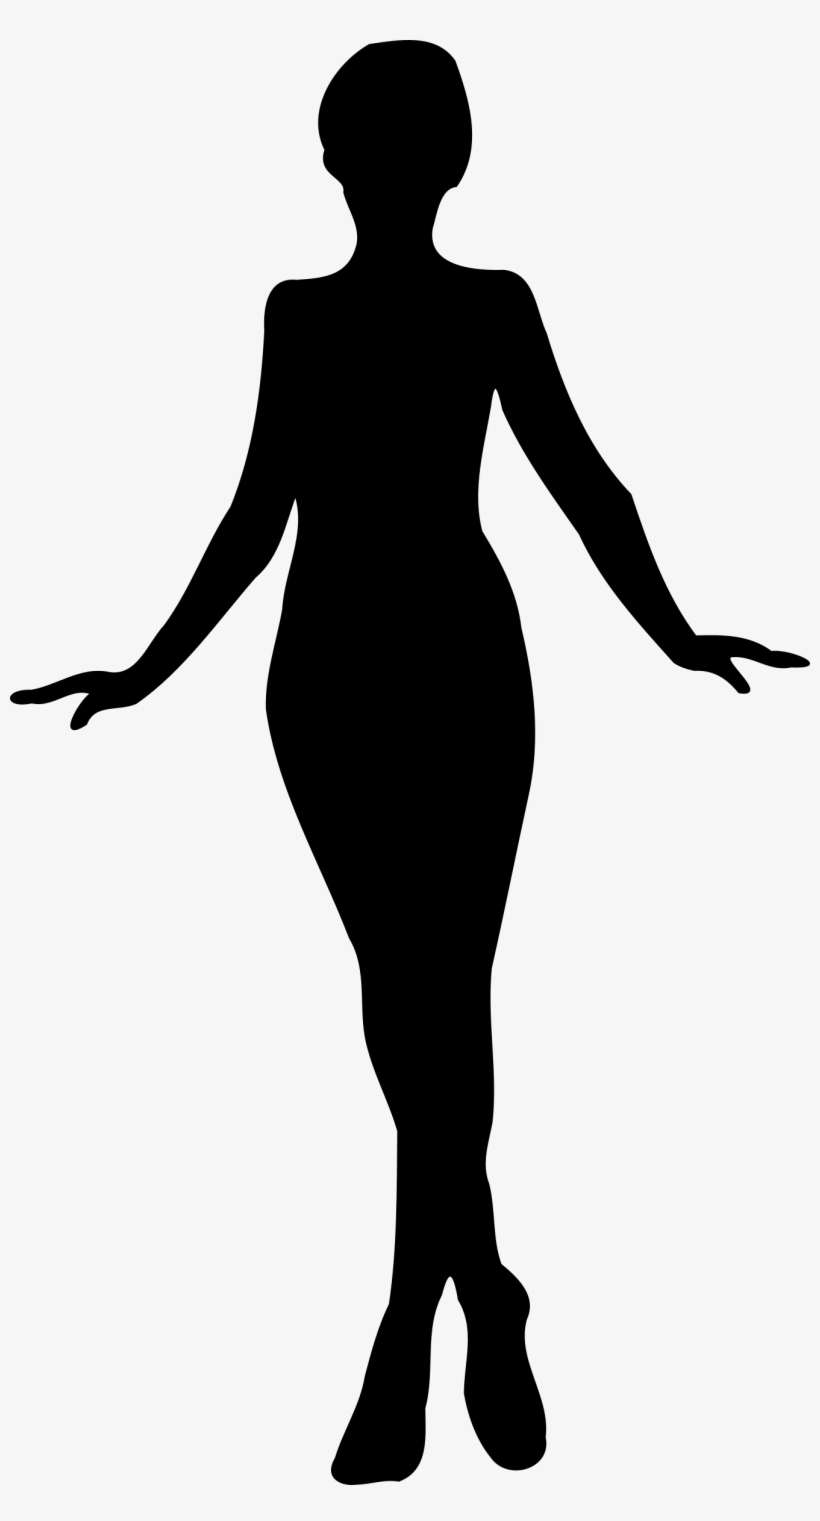 Free Vector Woman Silhouette - Plus Size Model Silhouette, transparent png #117774